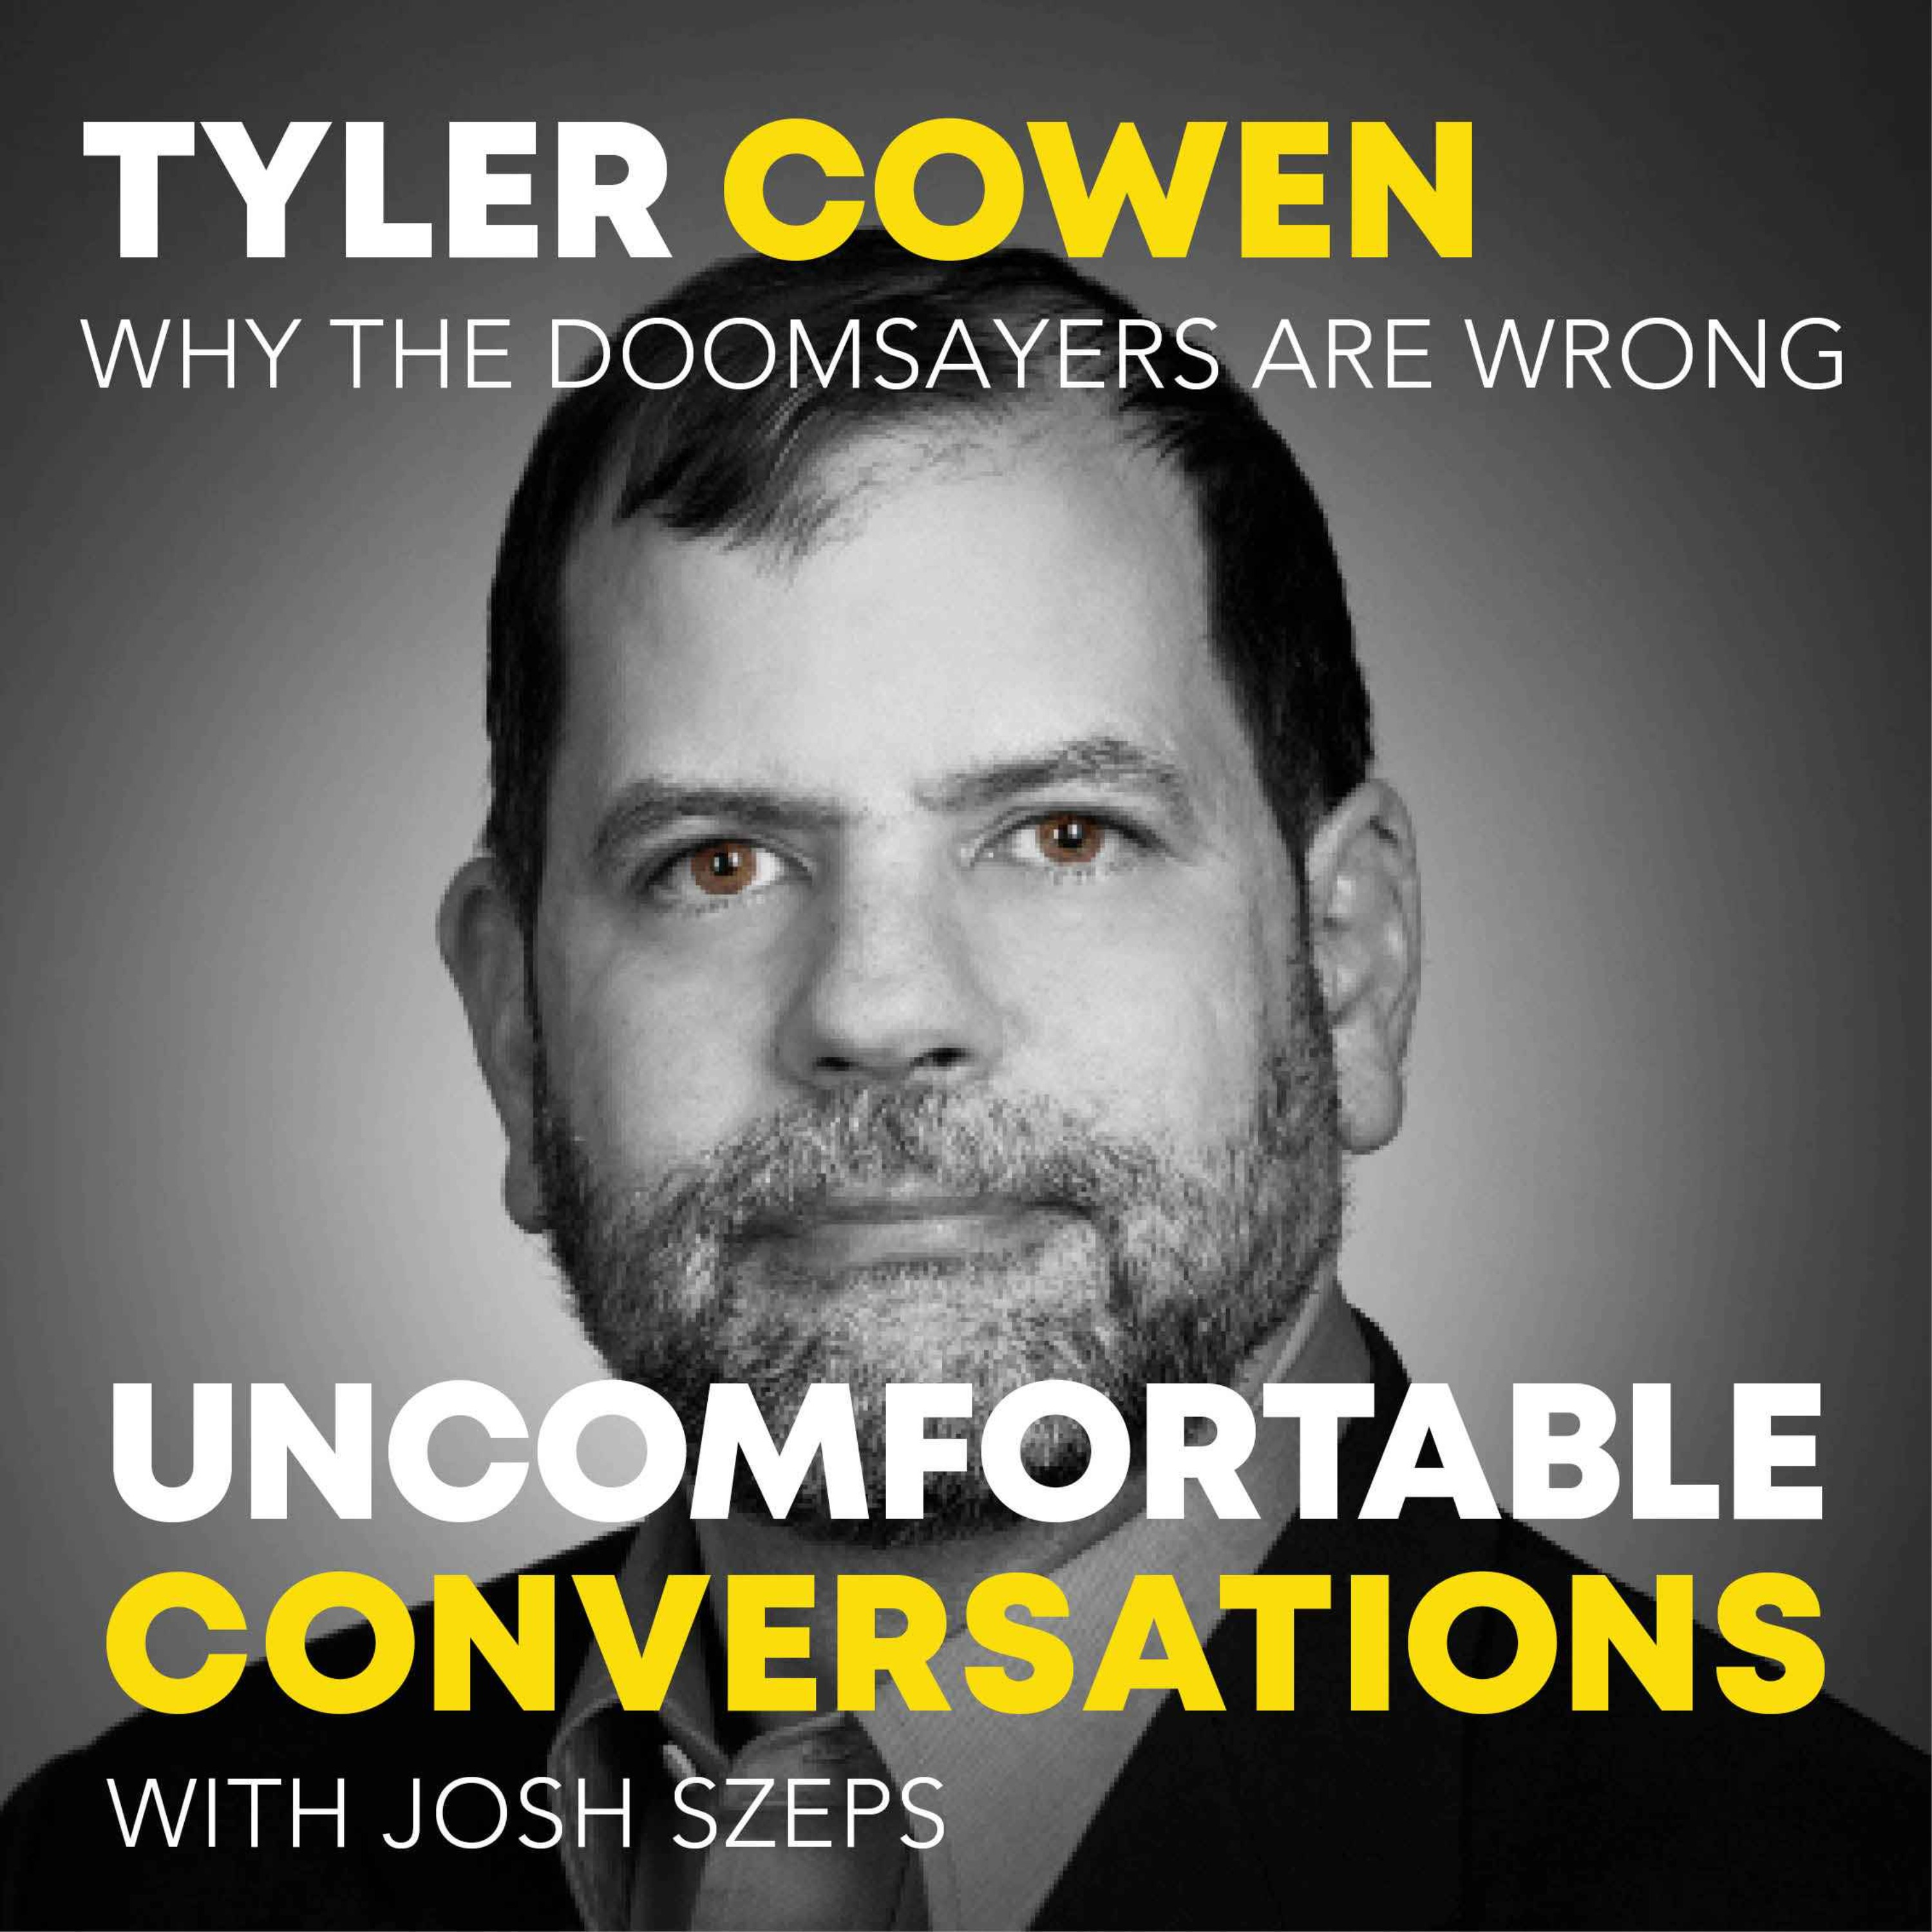 "Why The Doomsayers Are Wrong" with Tyler Cowen